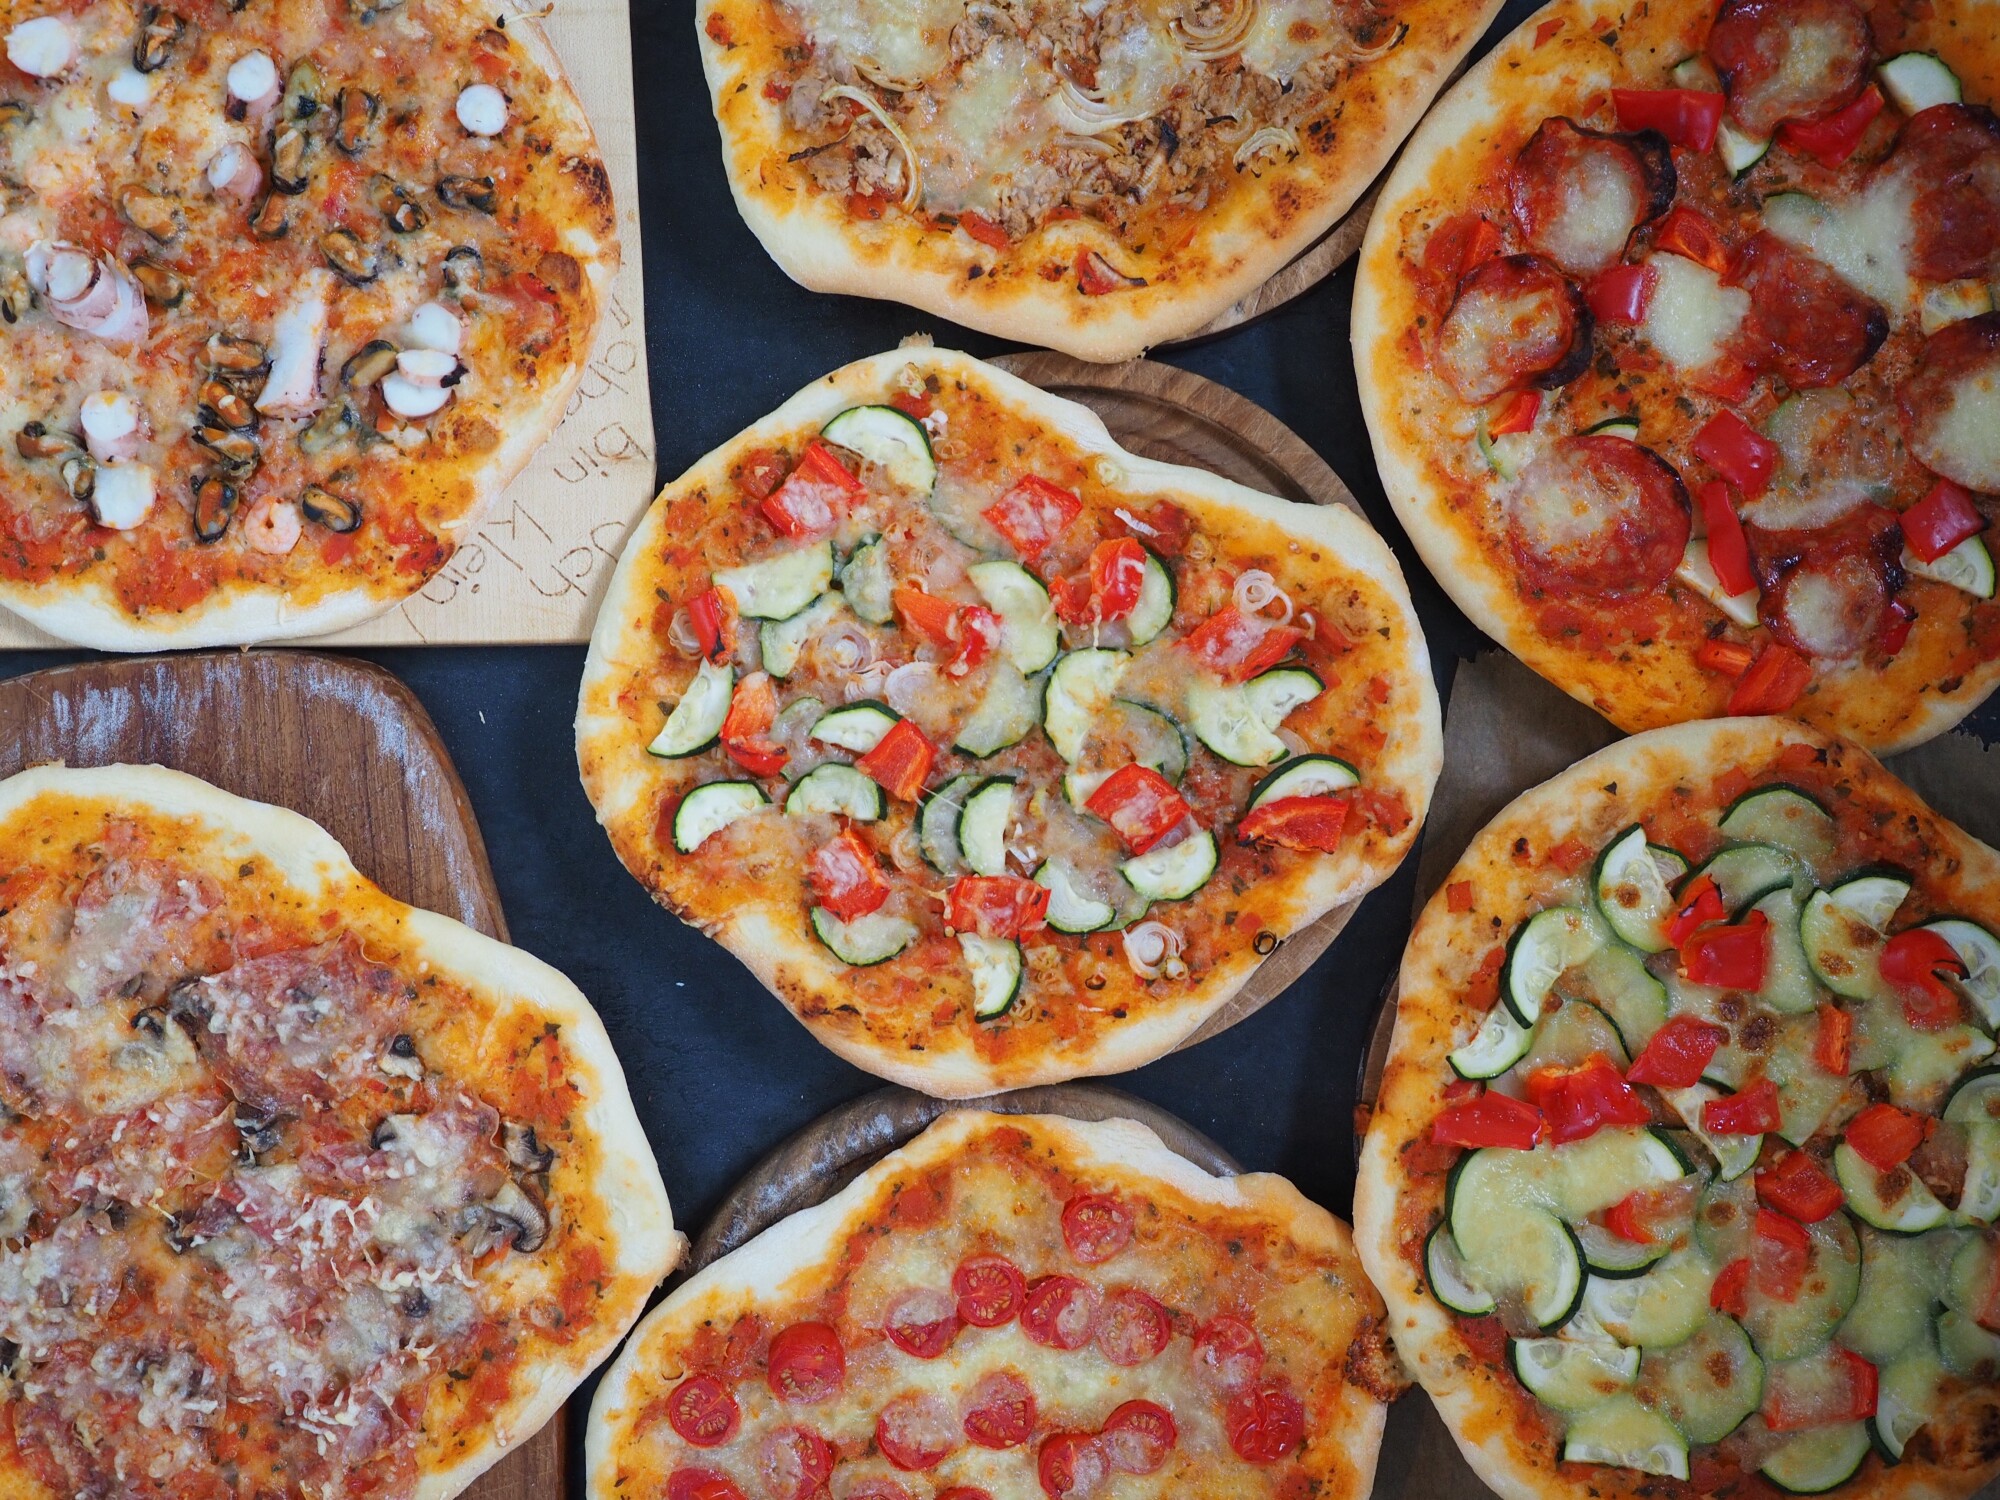 Krage Seks Kilde The Absolute Best Pizza Topping Combos You Need to Try